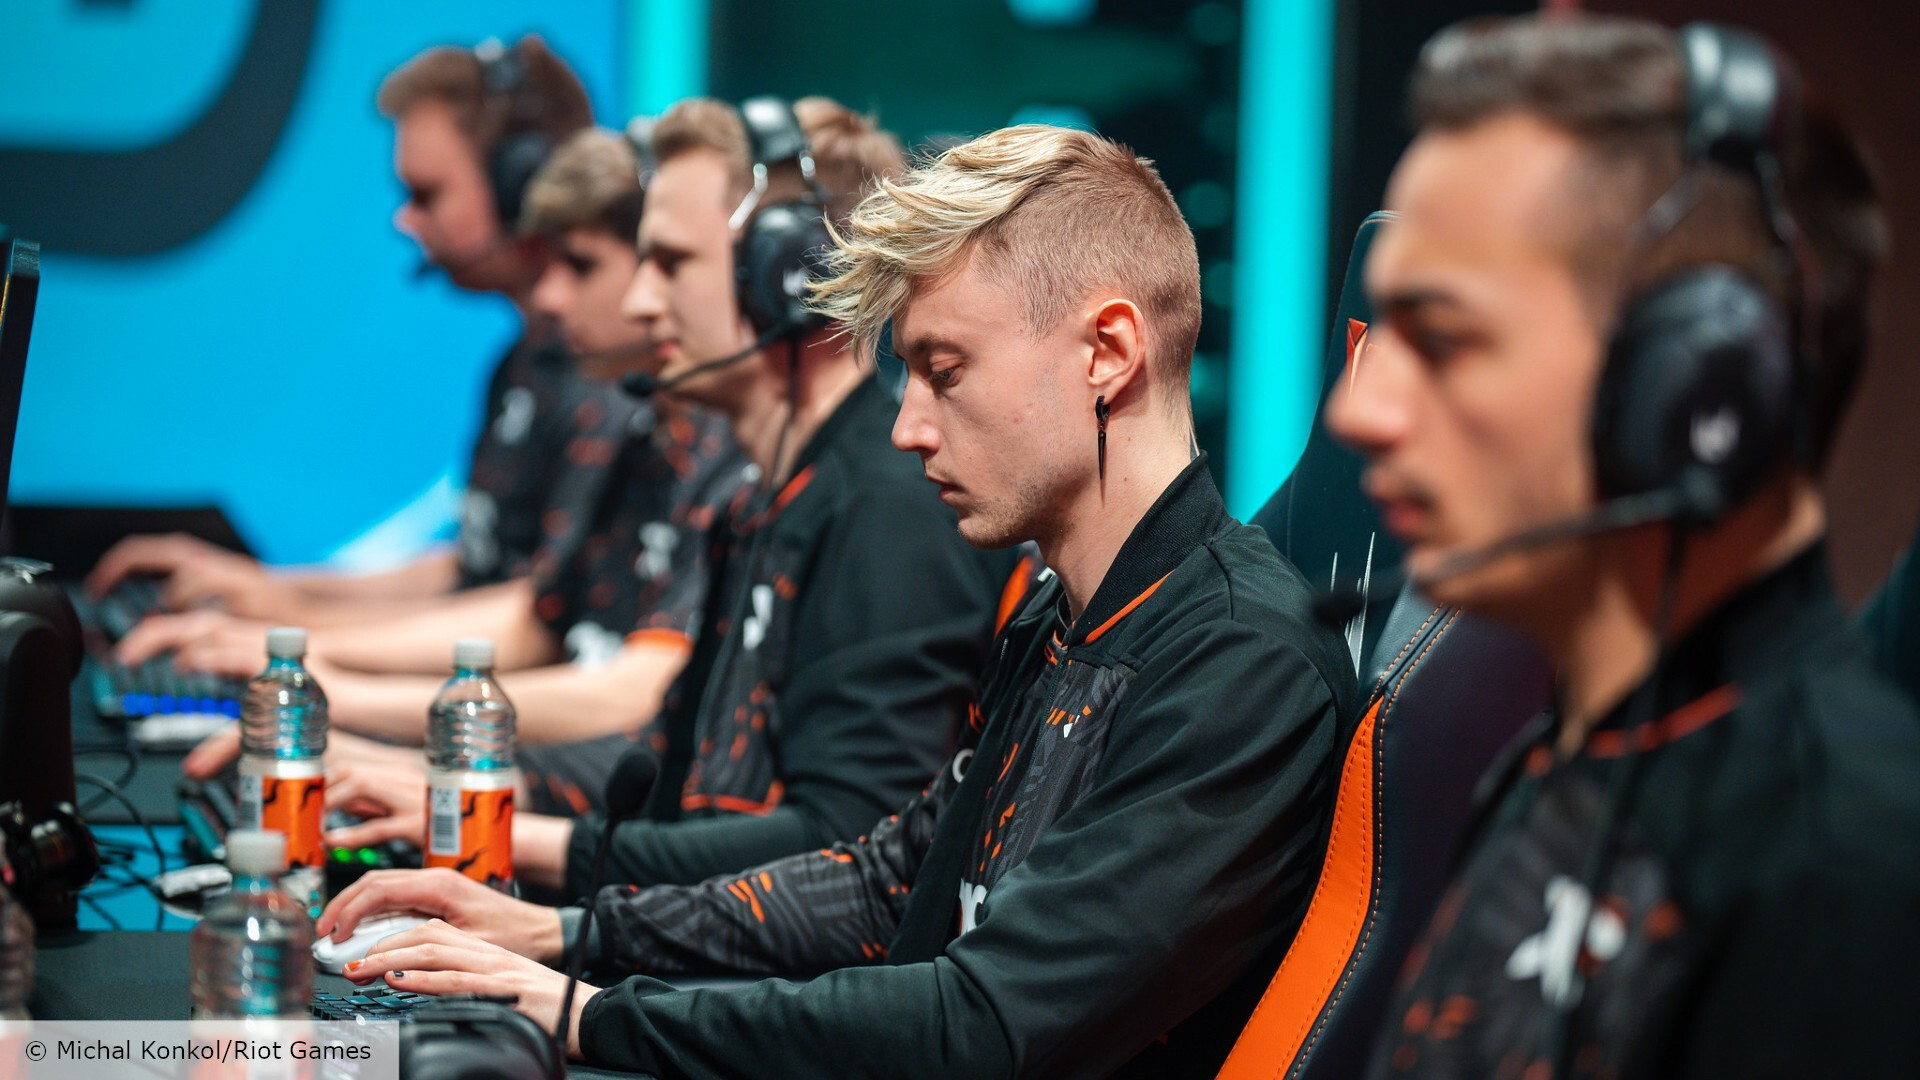 LEC Fnatic Winter Split 2023 suck: The Fnatic team on the LEC stage playing League of Legends